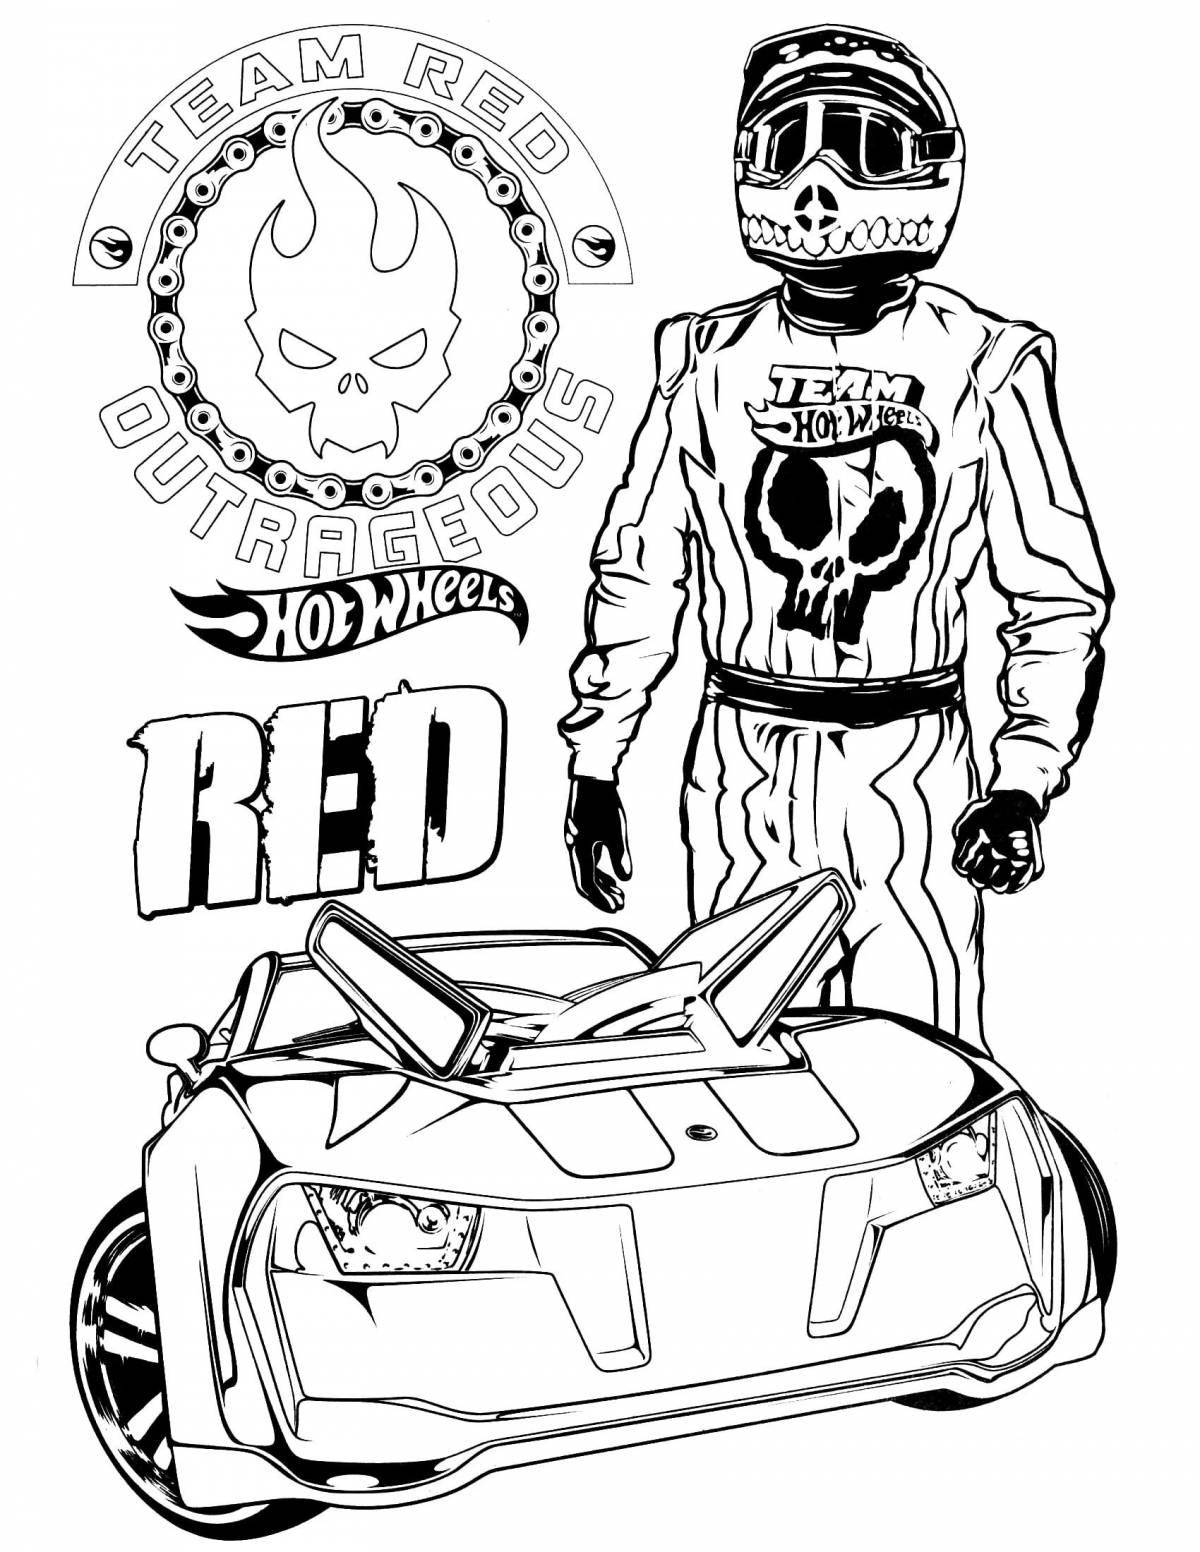 Impressive hot wheels coloring page